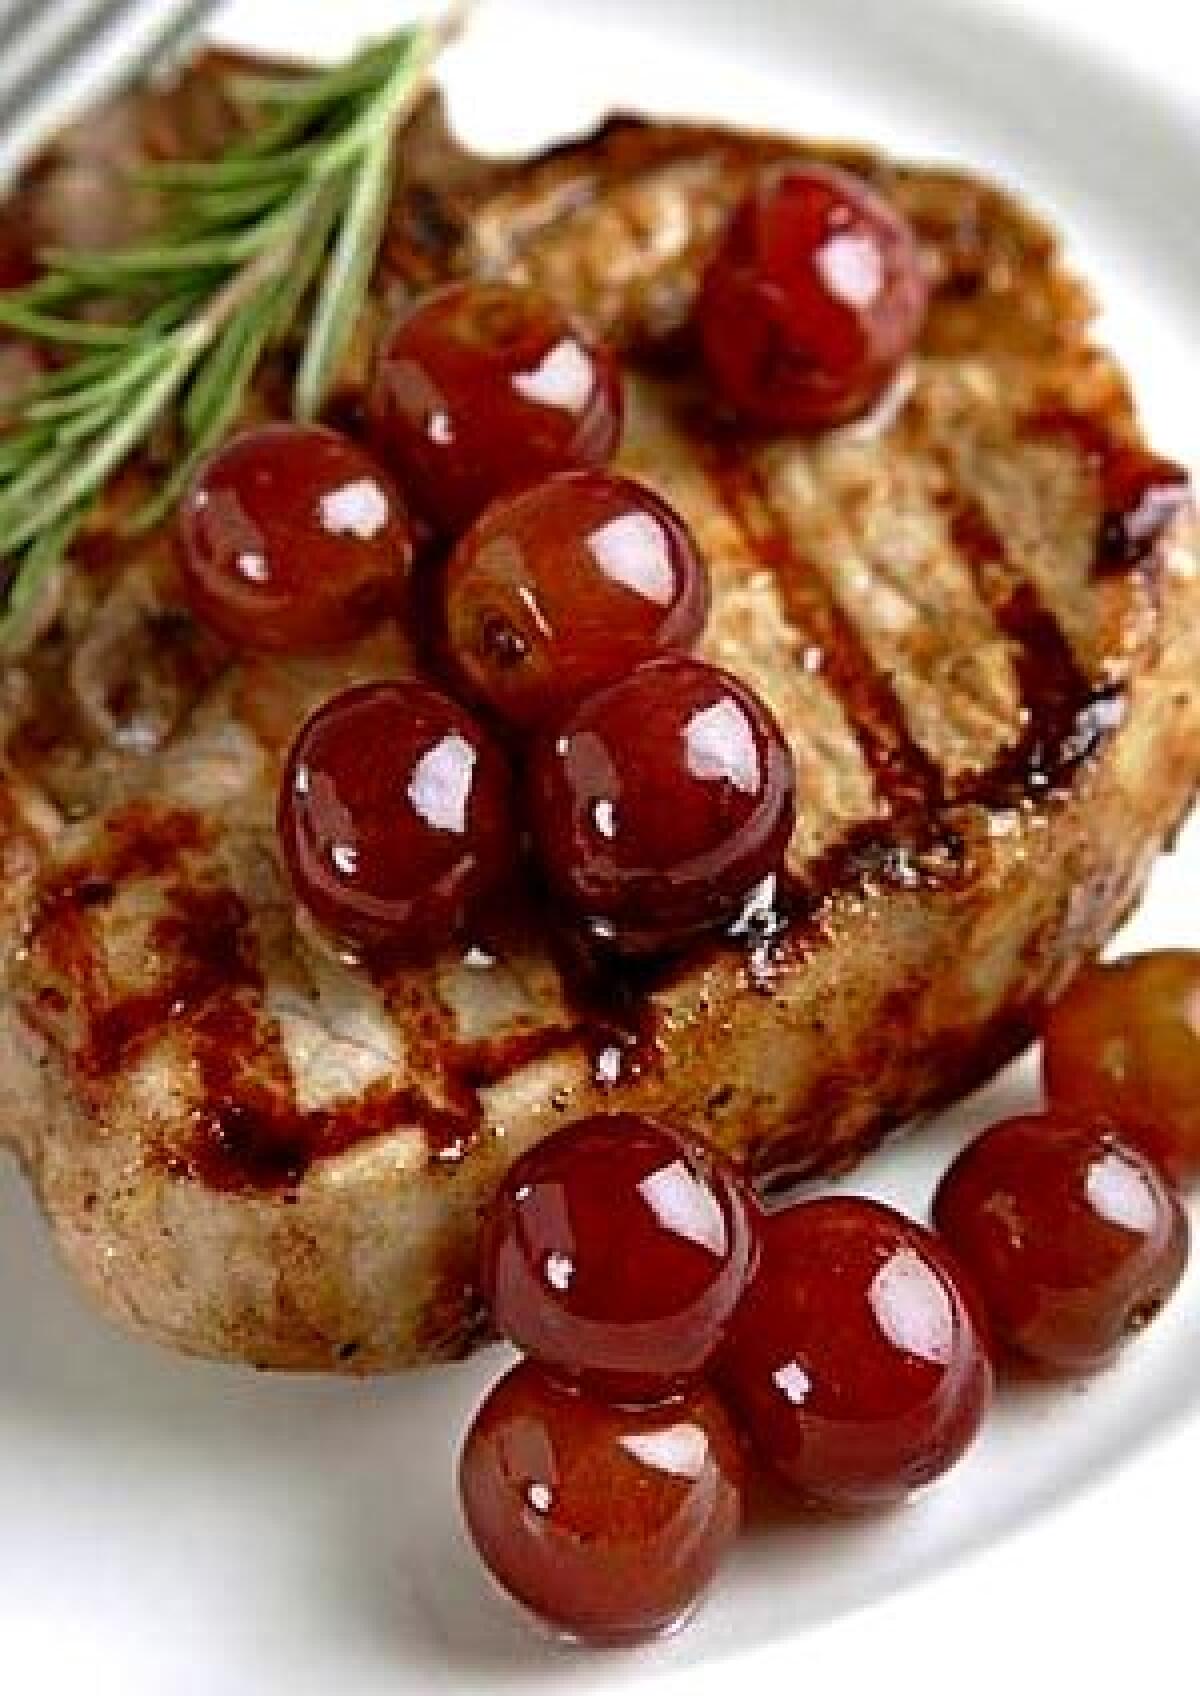 Minced onion adds a savory dimension to pickled grapes. Recipe: Pork with pickled grapes